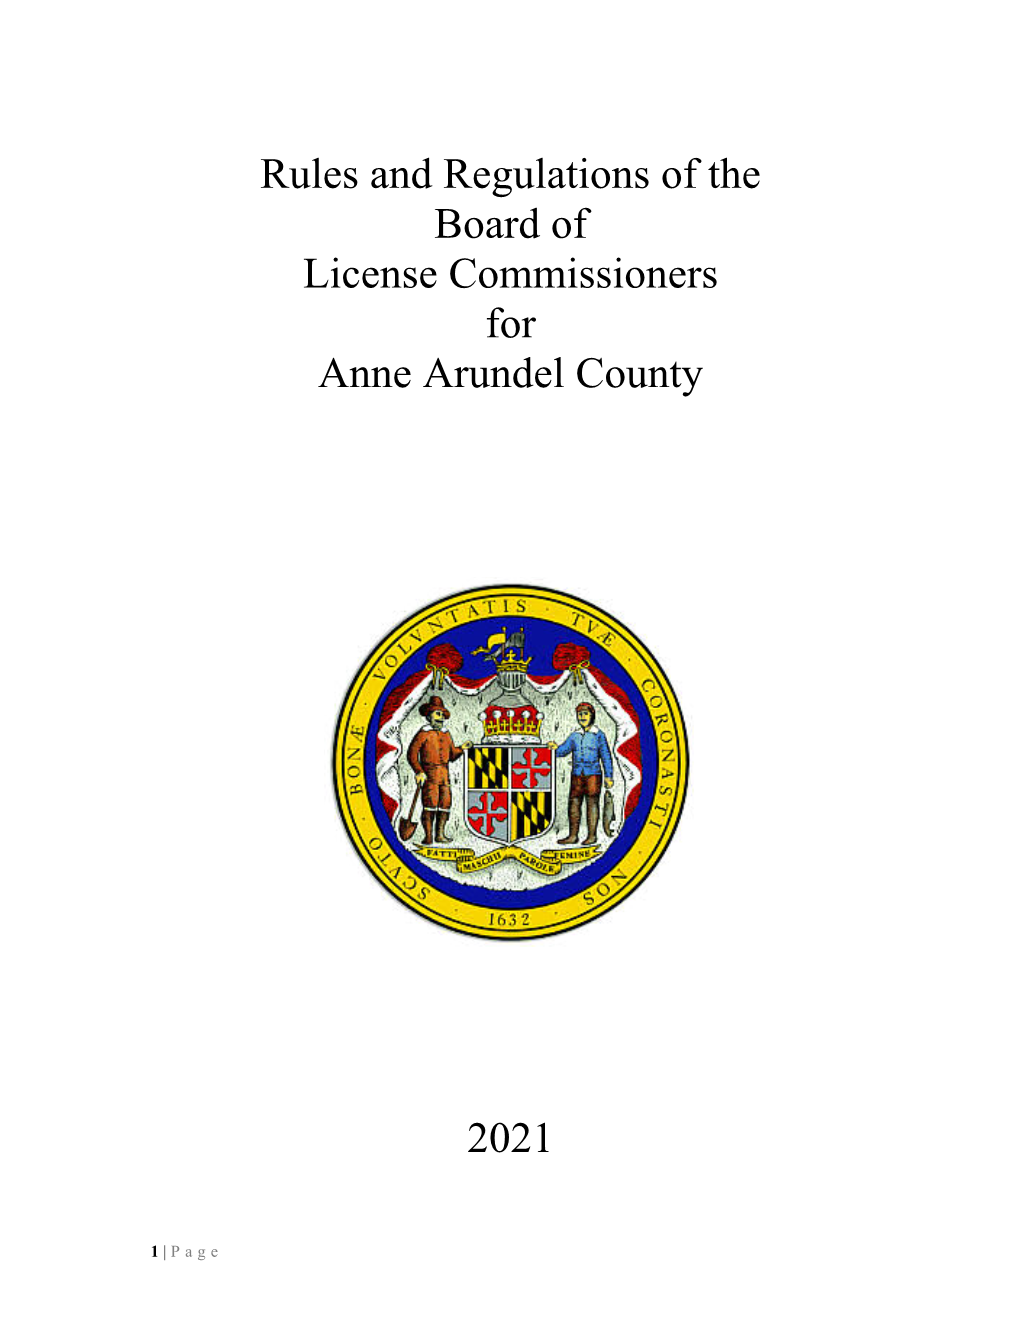 Rules and Regulations of the Board of License Commissioners for Anne Arundel County